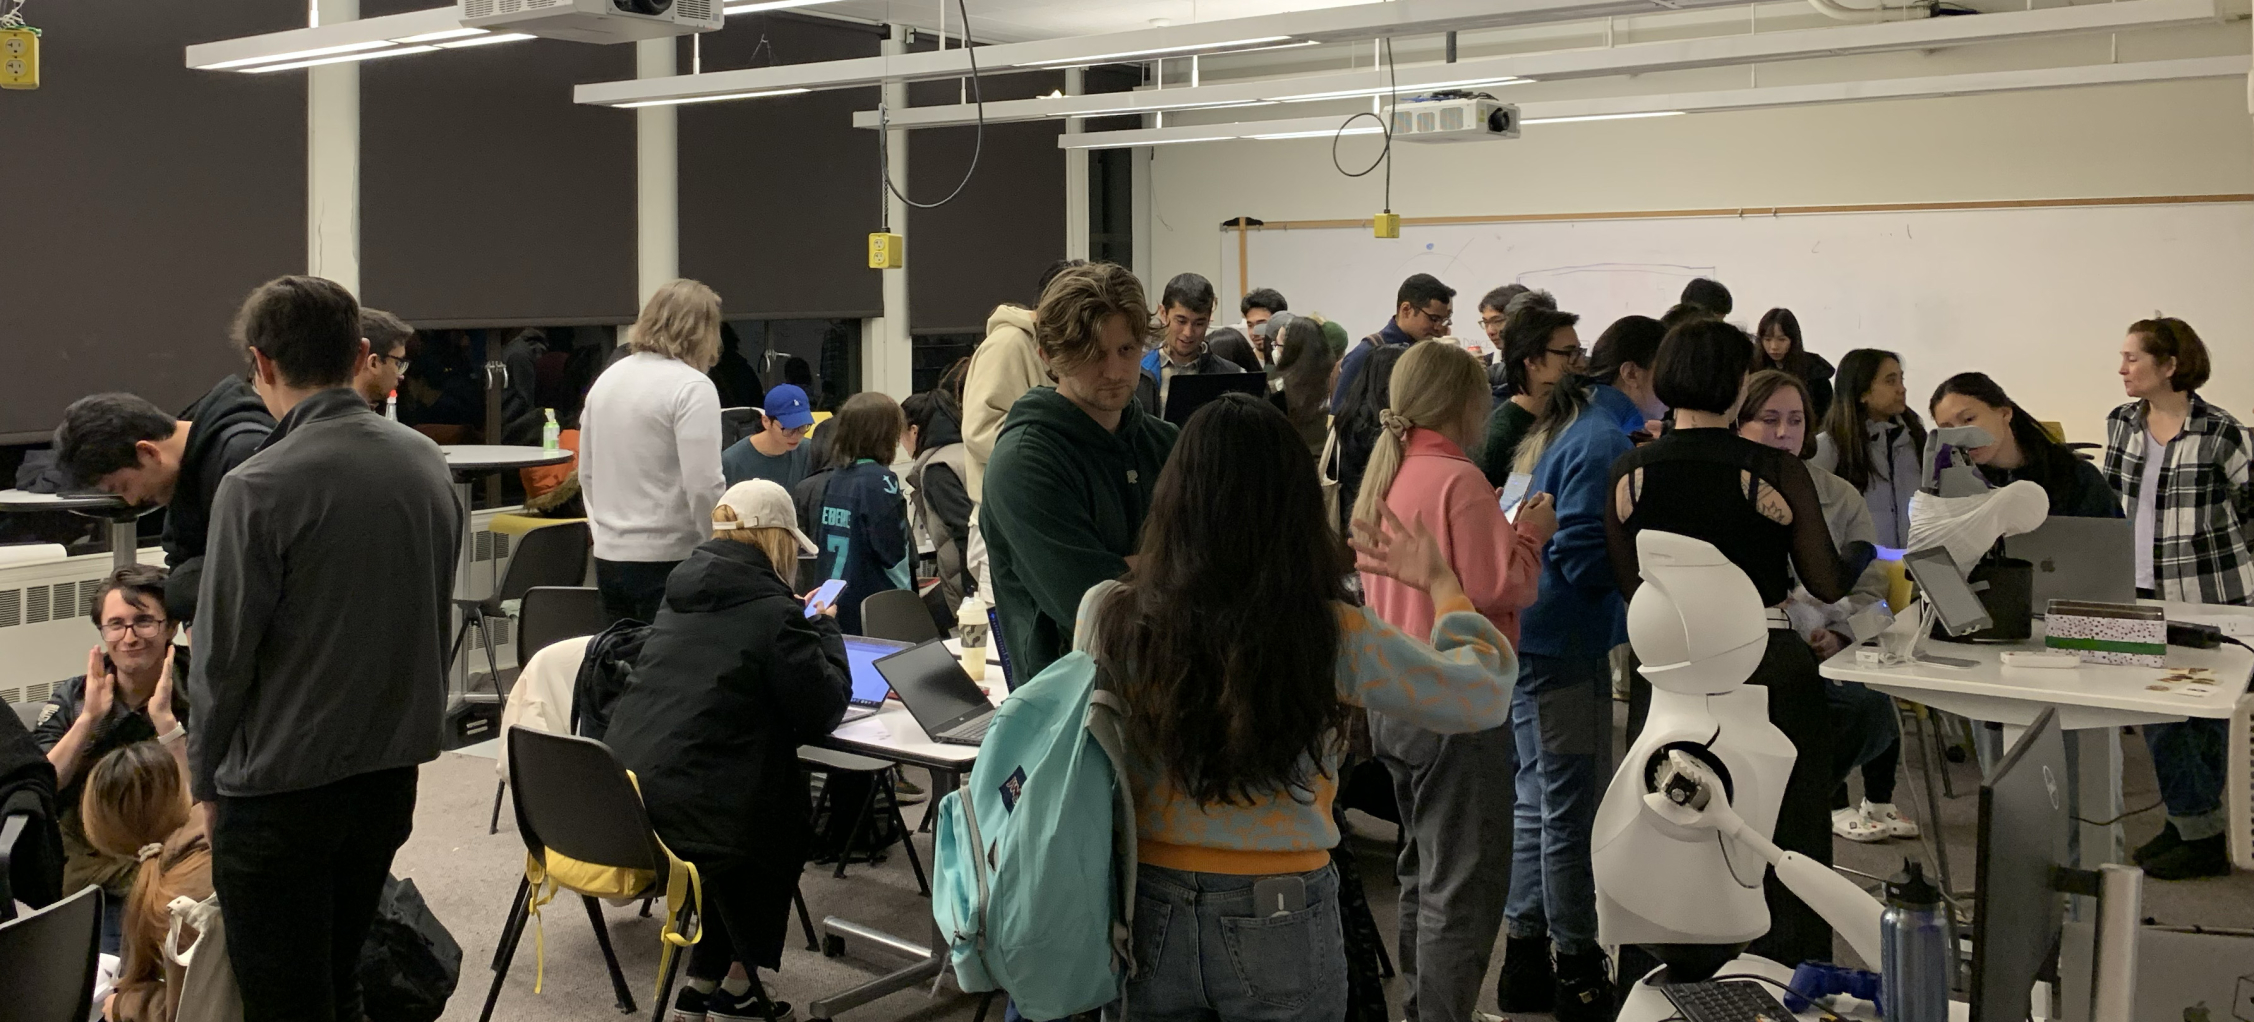 Classroom full of students and guests during the open showcase